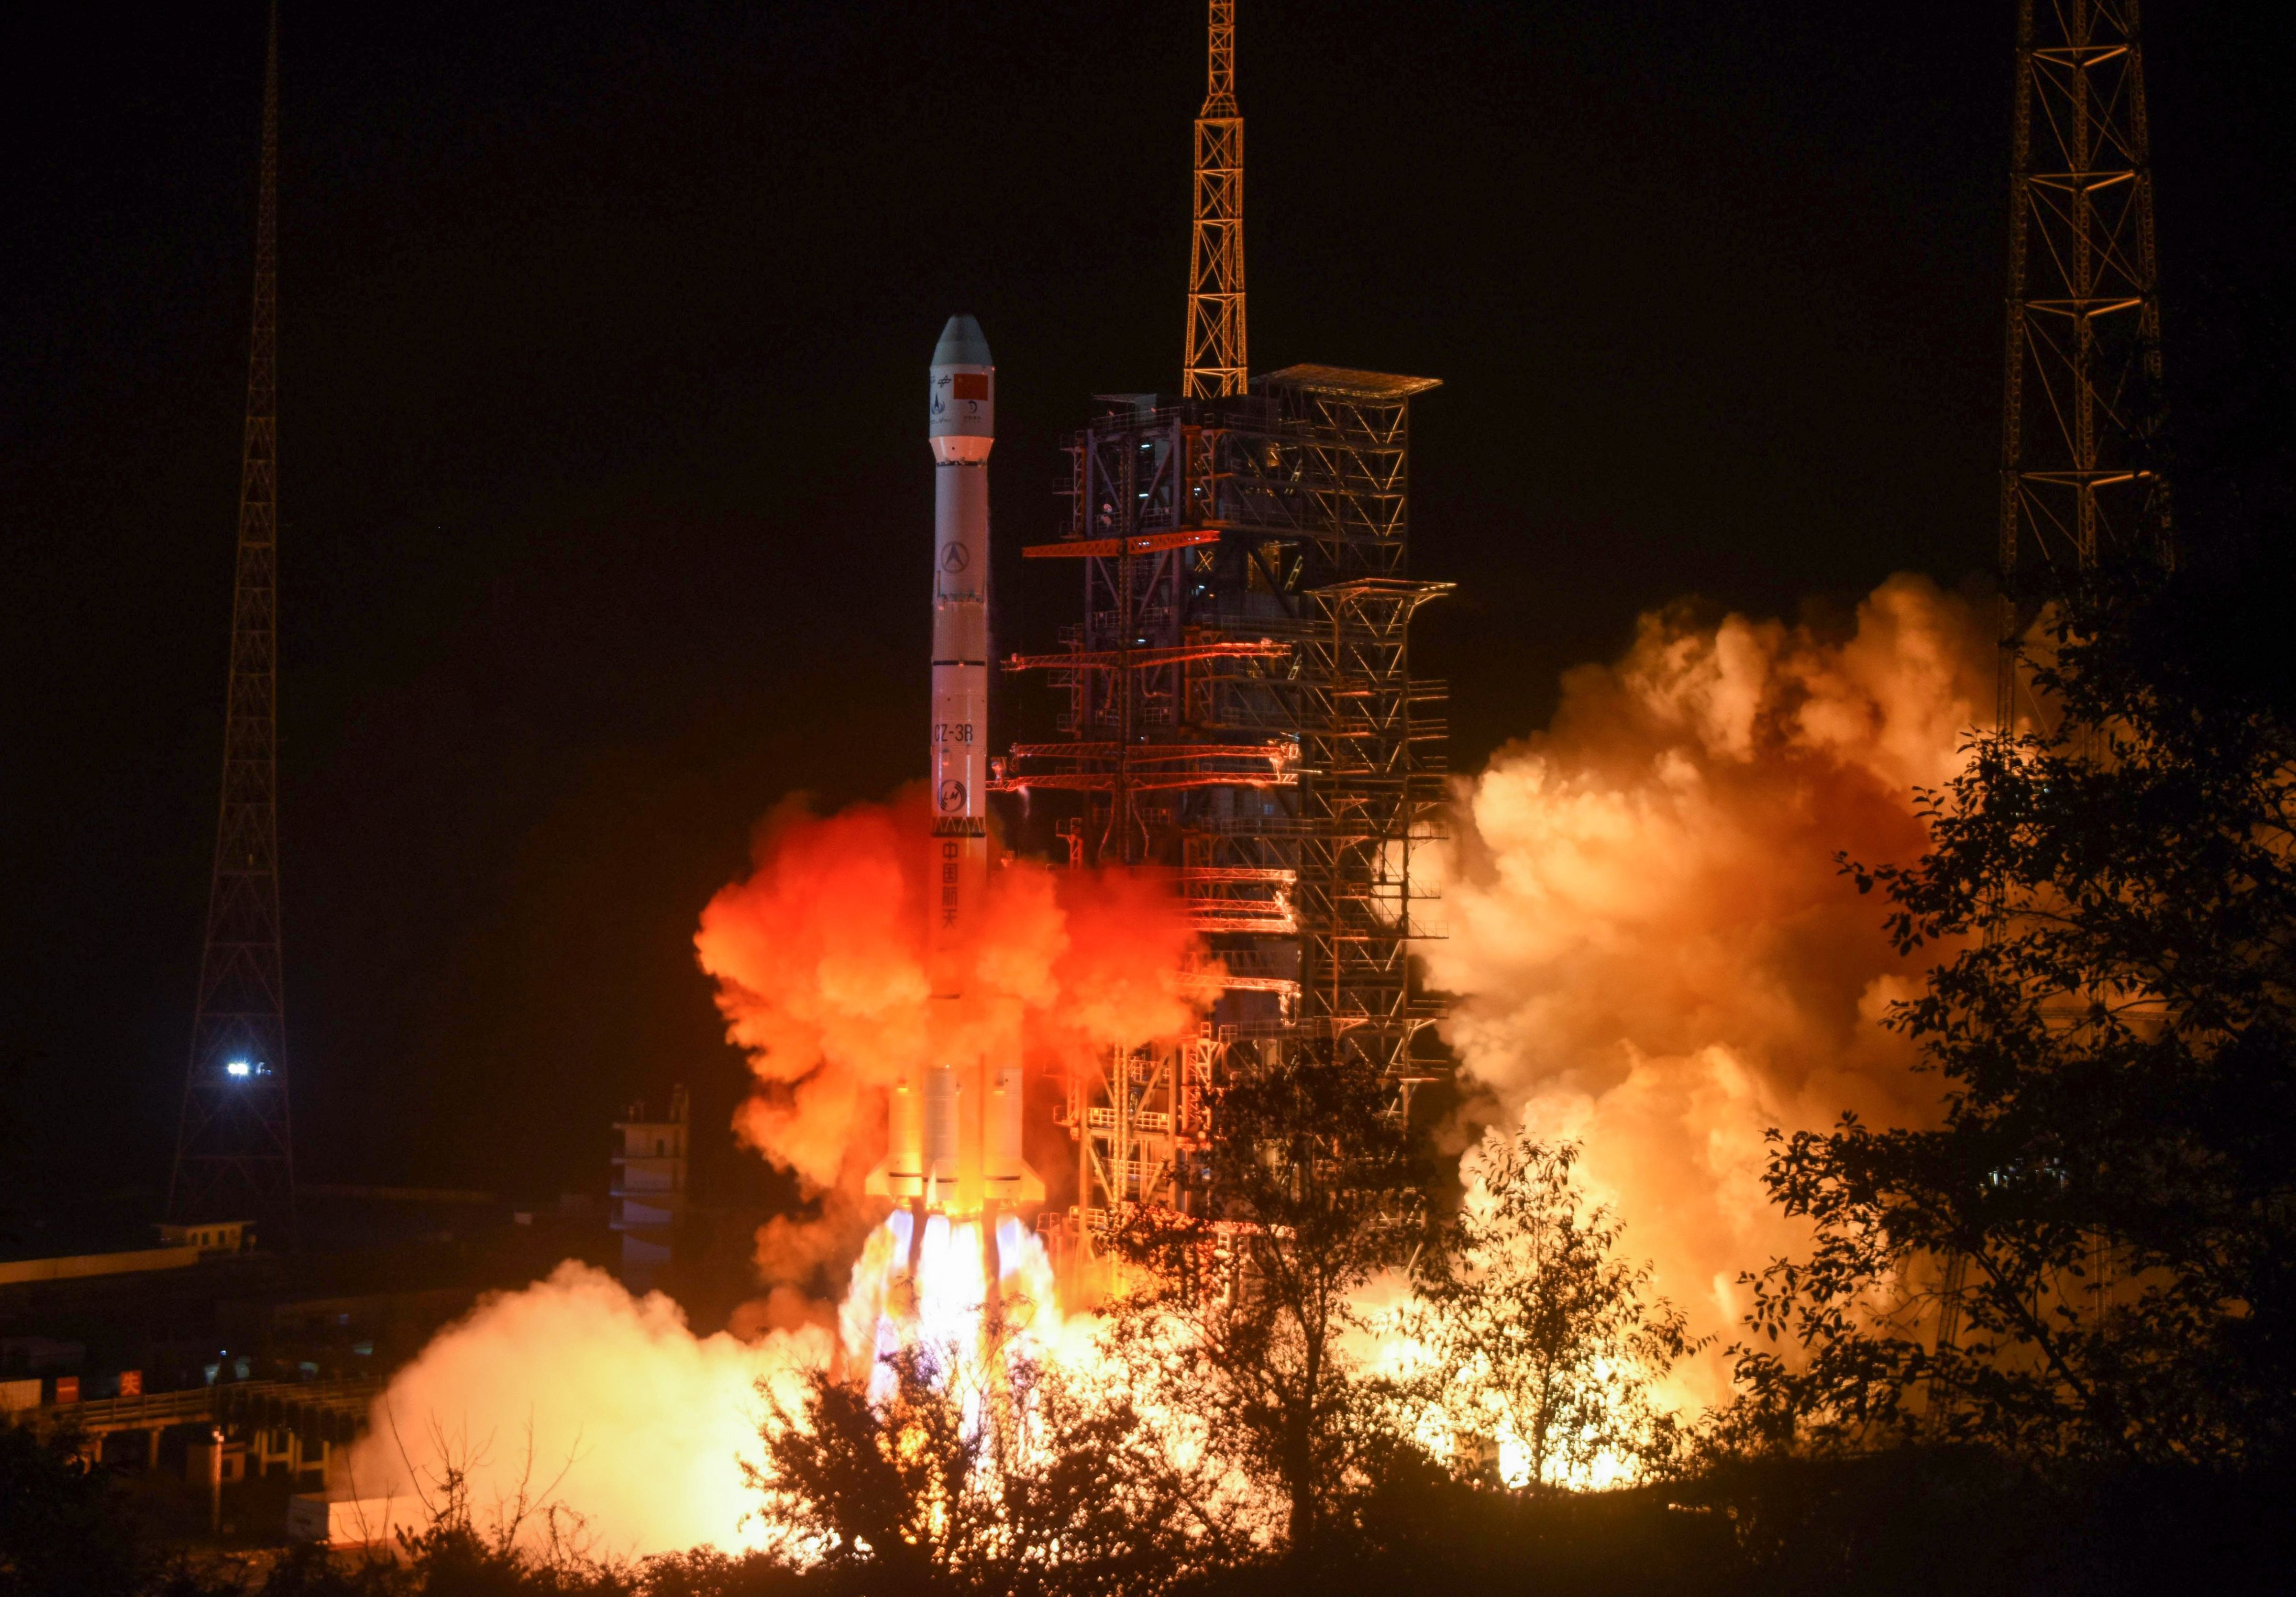 A Long March 3B rocket lifts off from the Xichang launch center in China's southwestern Sichuan province on Dec. 8, 2018. (Stringer&mdash;AFP/Getty Images)